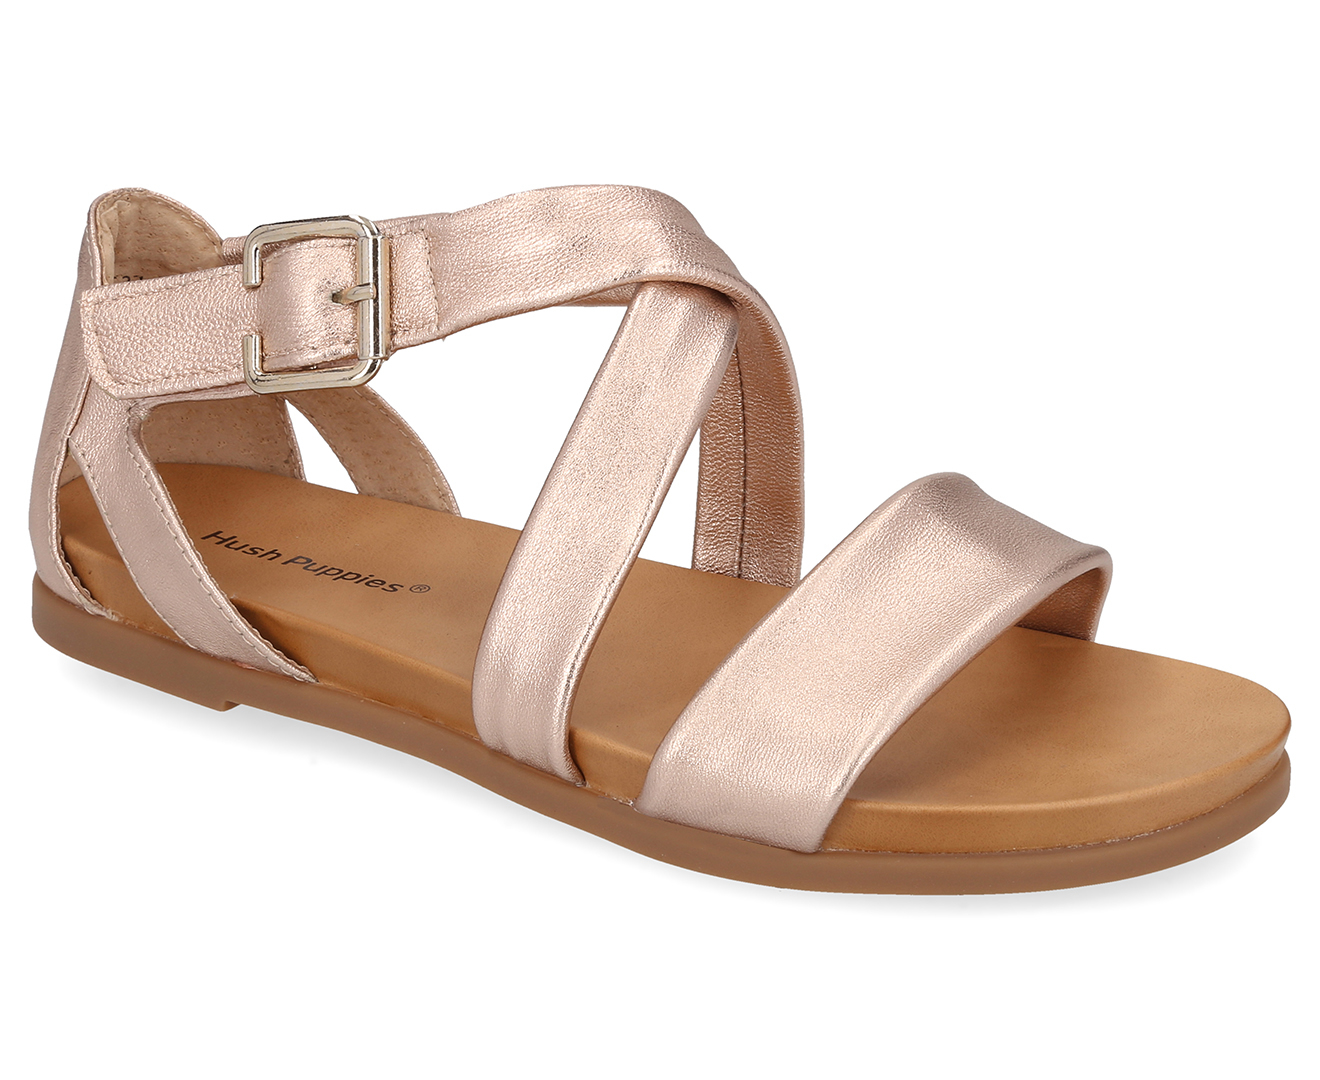 Hush Puppies Gold Sandals in Trichy - Dealers, Manufacturers & Suppliers -  Justdial